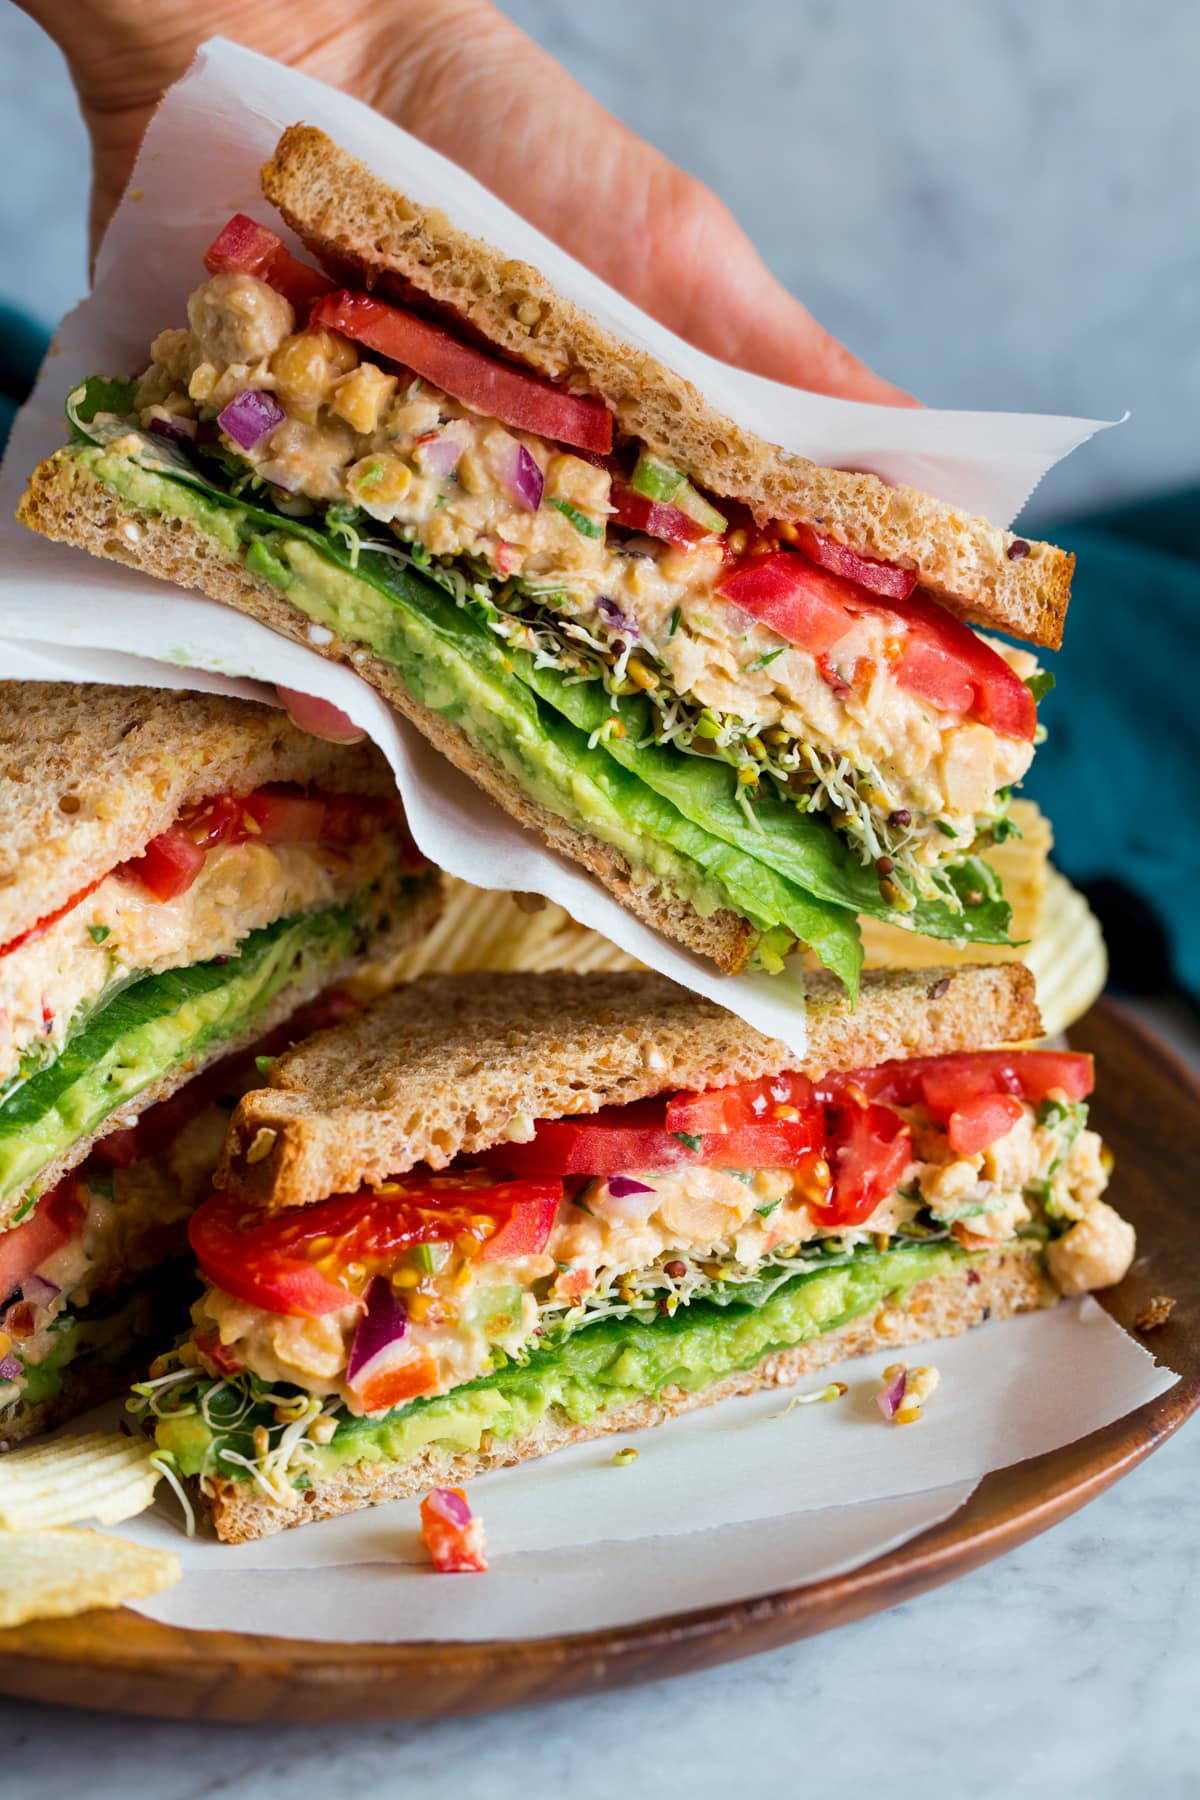 Chickpea salad sandwiches shown sliced in half and showing layers.